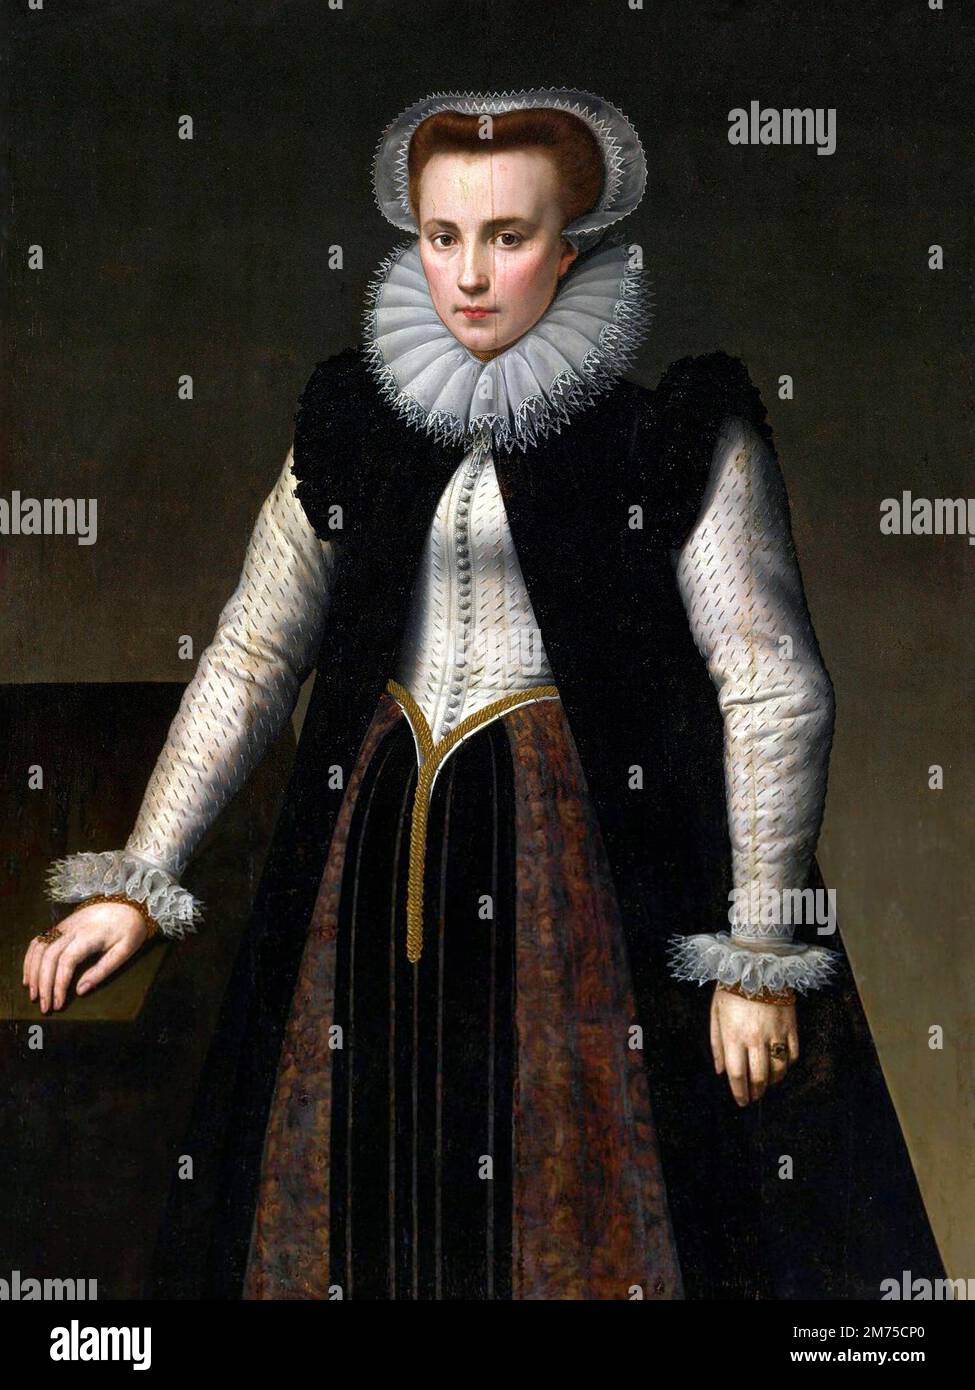 Elizabeth Báthory. Disputed portrait of Countess Elizabeth Báthory de Ecsed (1560-1614) by Anthonie Blocklandt van Montfoort (1533-1583), oil on panel, 1580. Bathory was a Hungarian noblewoman and alleged serial killer from the family of Báthory, who owned land in the Kingdom of Hungary (now Slovakia). She and four of her servants were accused of torturing and killing hundreds of girls and women between 1590 and 1610. Her servants were put on trial and convicted, whereas Báthory was confined until her death. Stock Photo